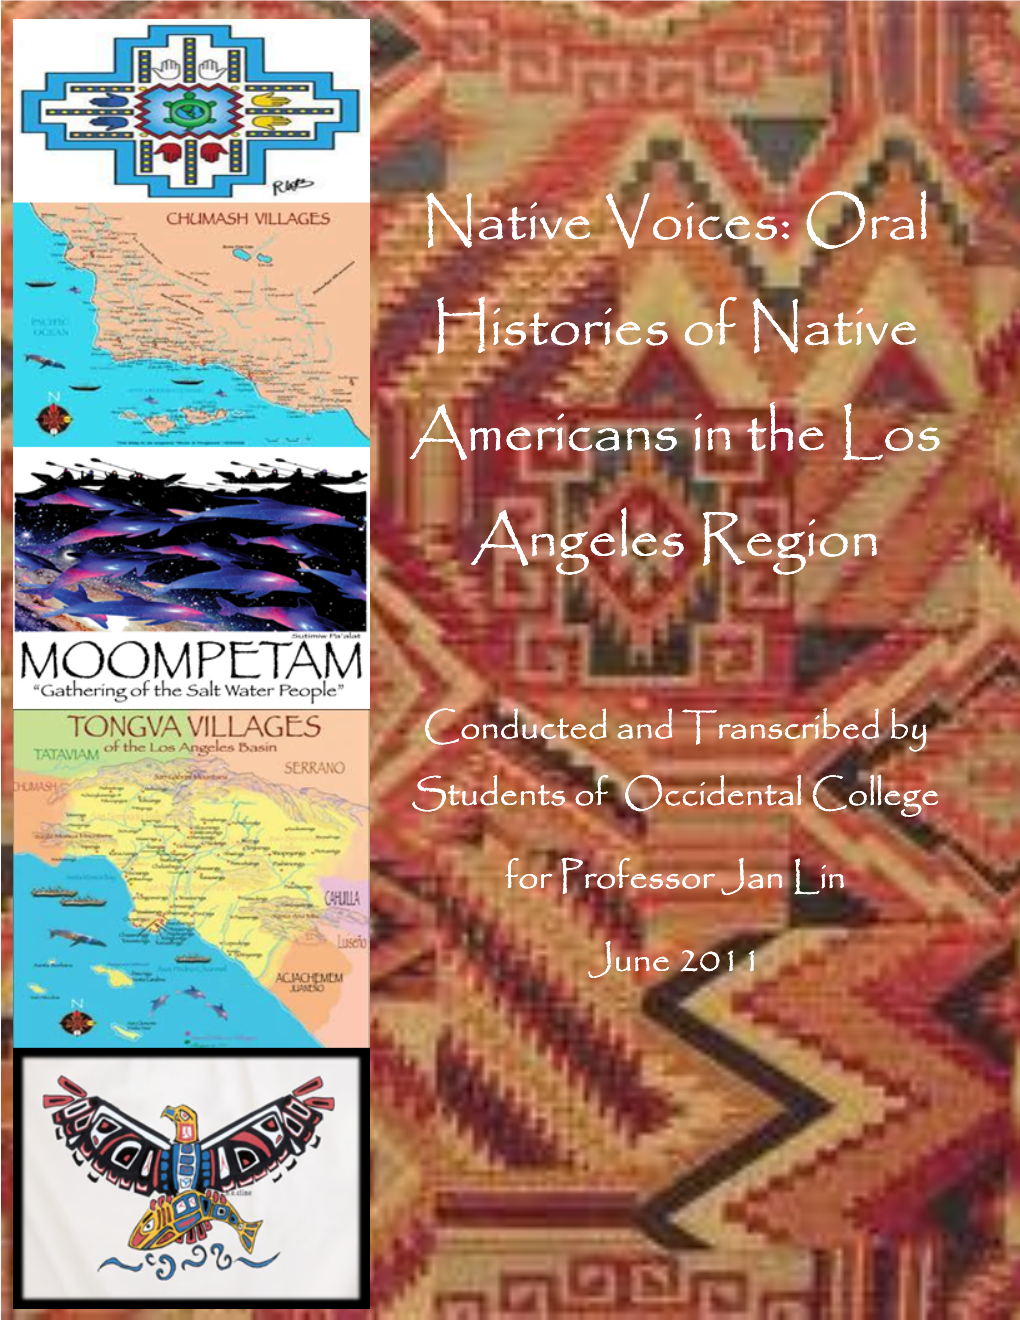 Native Voices: Oral Histories of Native Americans in the Los Angeles Region